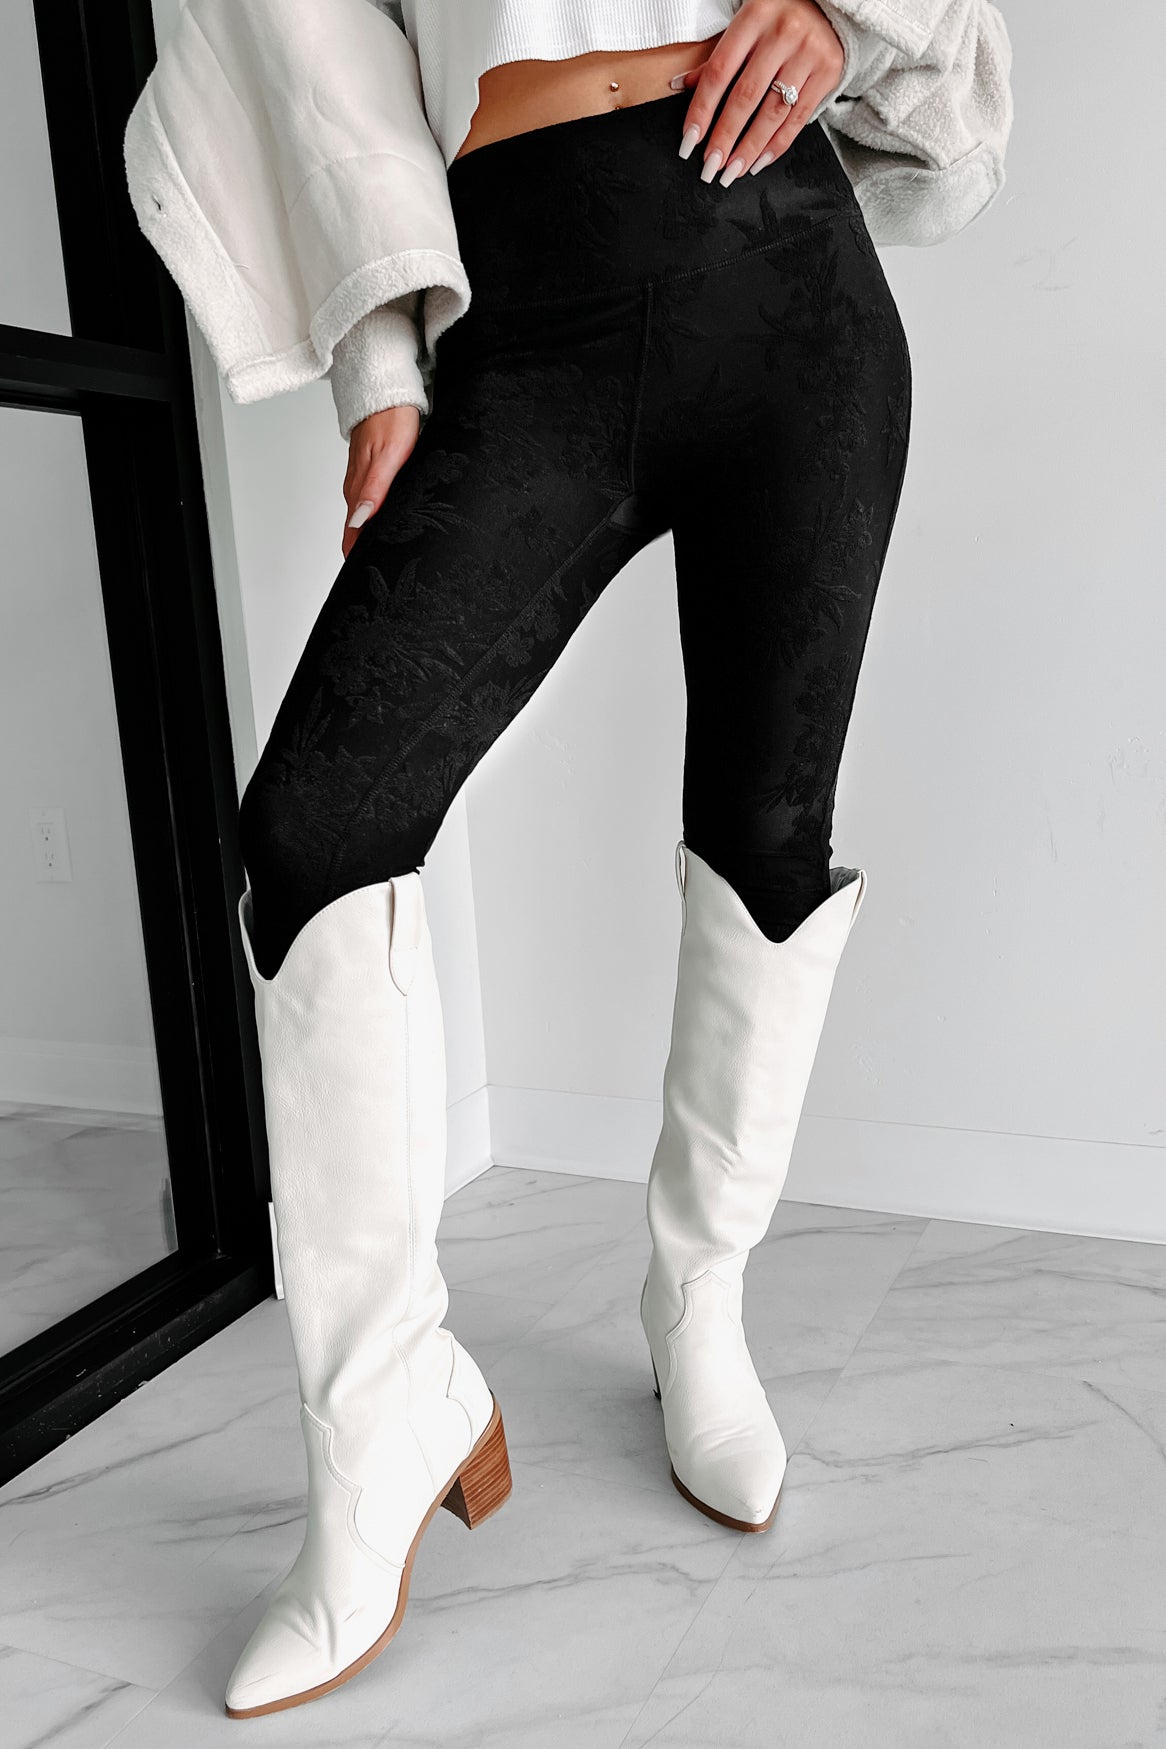 Feminine Power Floral Textured Double-Layered Leggings, 55% OFF